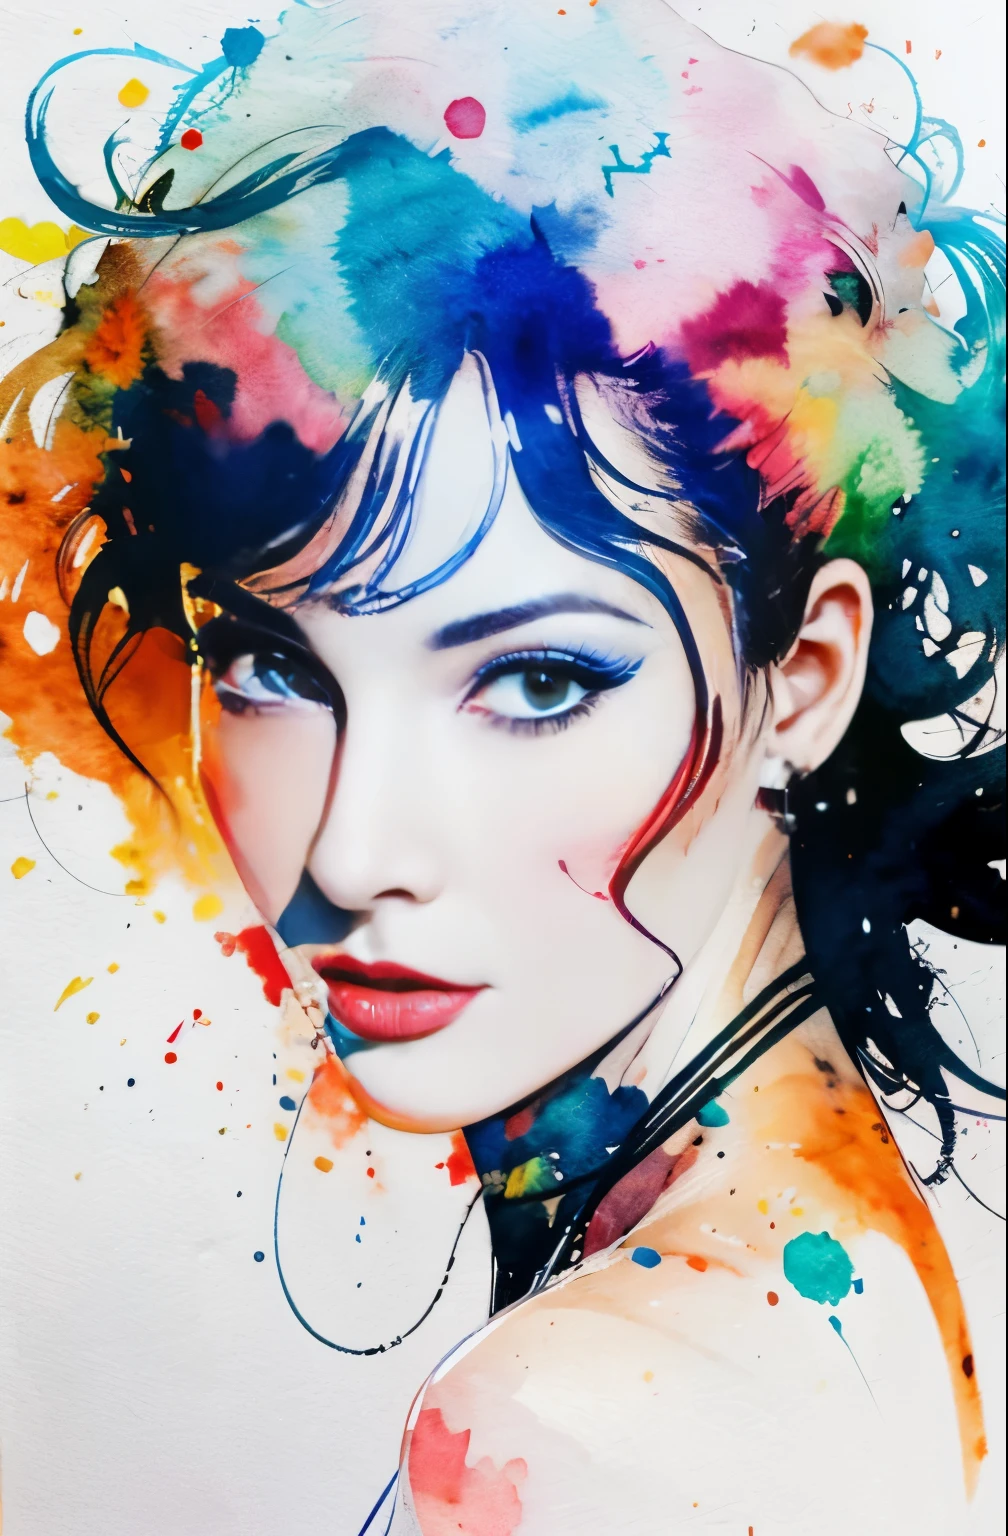 painting of woman, tumbler, figurative art, Intense watercolor painting, watercolor detailed art, Watercolor Splash, surreal, Avant-garde pop art, Beautiful and expressive paintings, Beautiful artwork illustration, very colorful tones, wonderful, cool beauty, highest quality,official art, women only, sharp outline, best shot, vector art, Written by Sandra Chevrier, Dave McKean、by Richard Avedon、Written by Makiezi Kusiala, luminous design